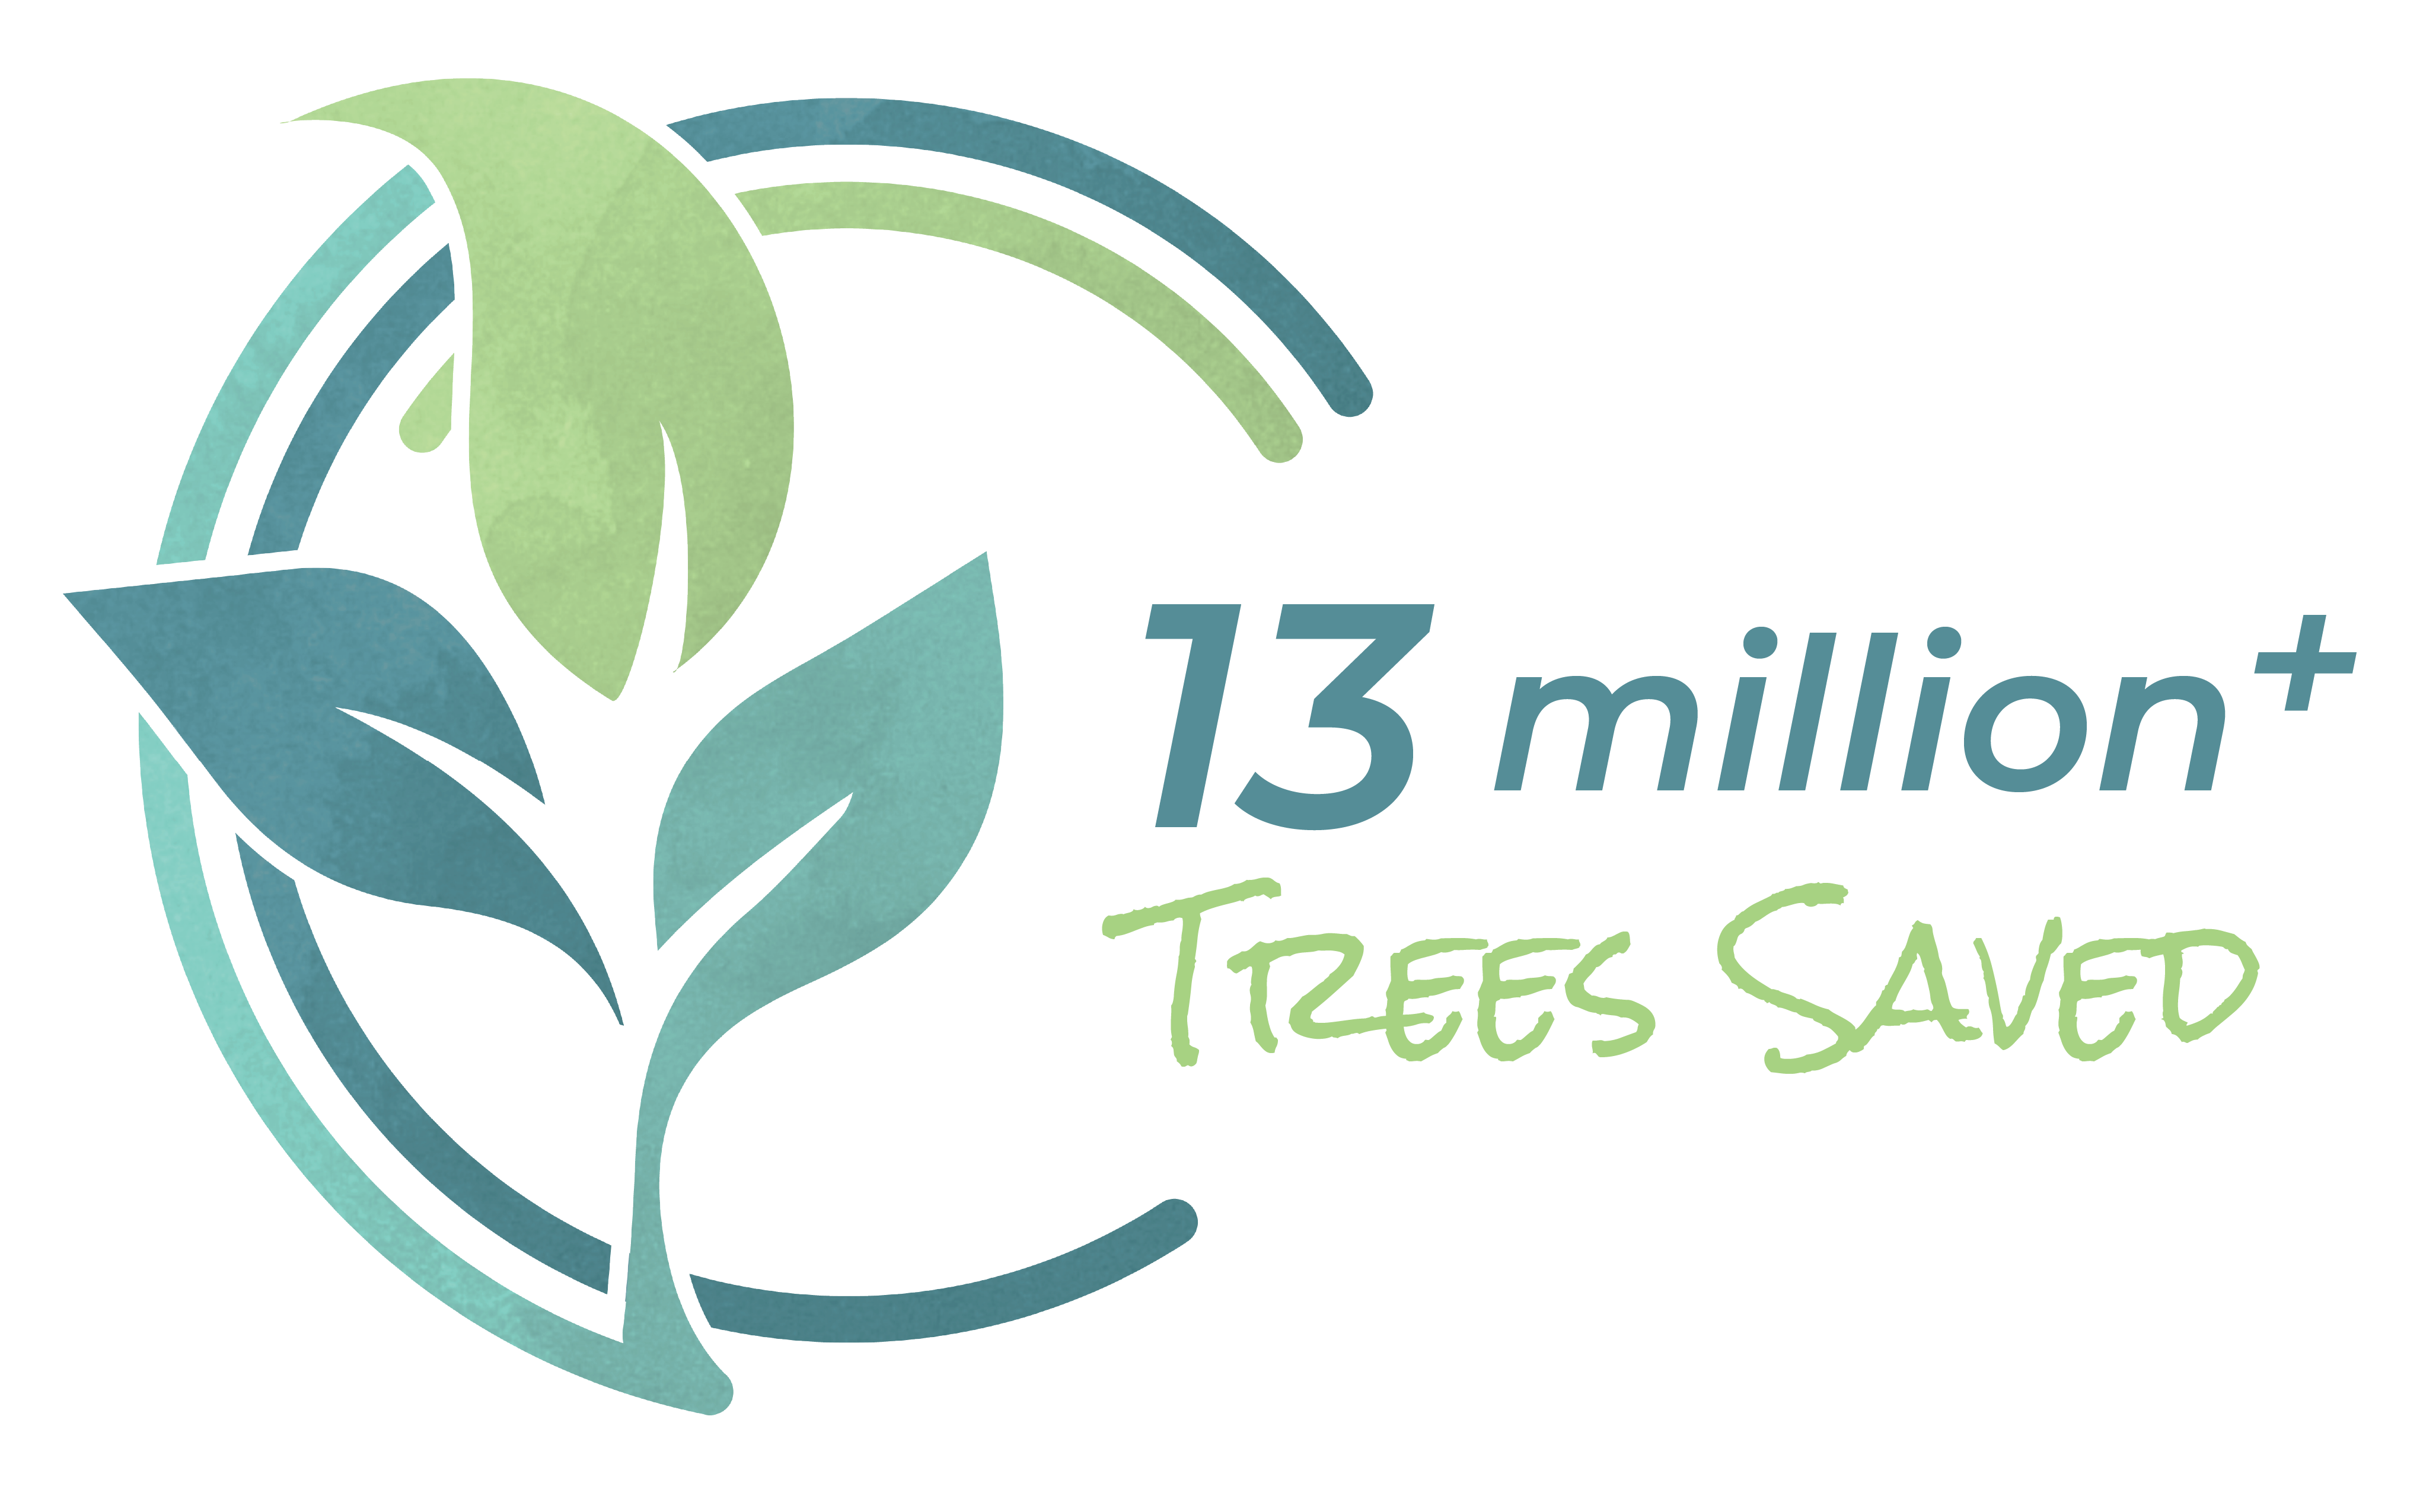 1625+ New Trees Planted